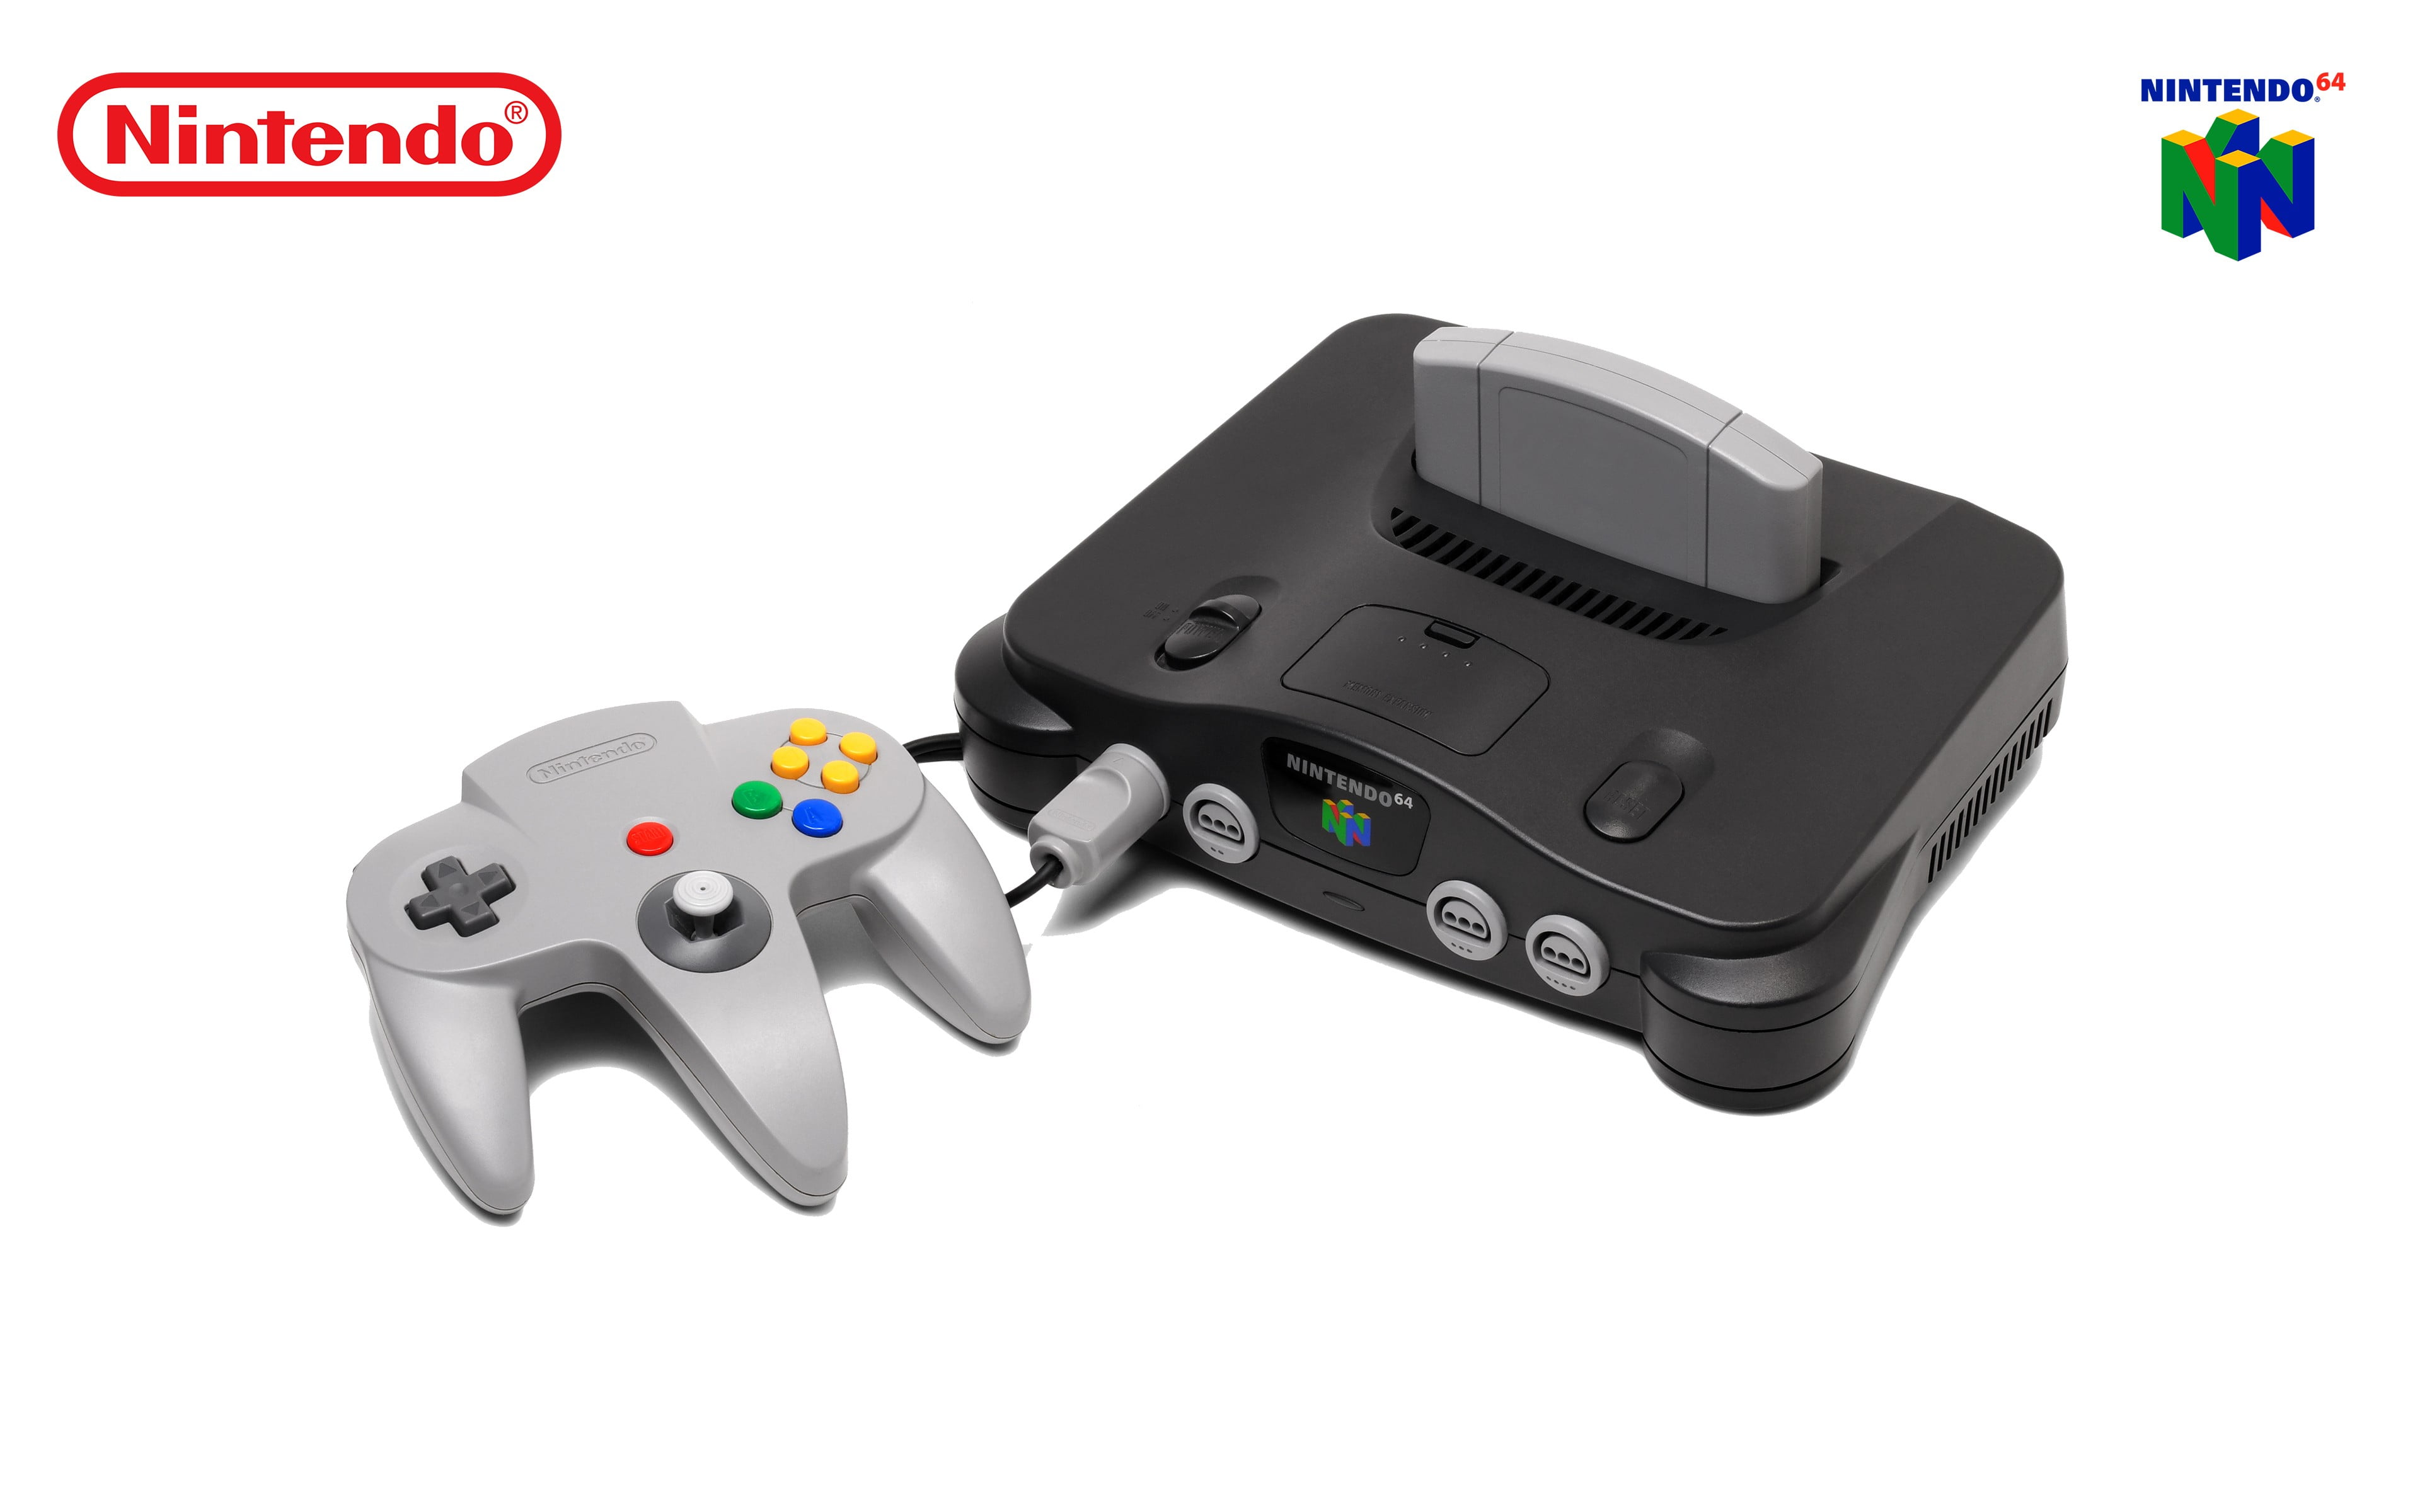 black Nintendo 64 with gray corded controller, Nintendo 64, consoles, video games, simple background